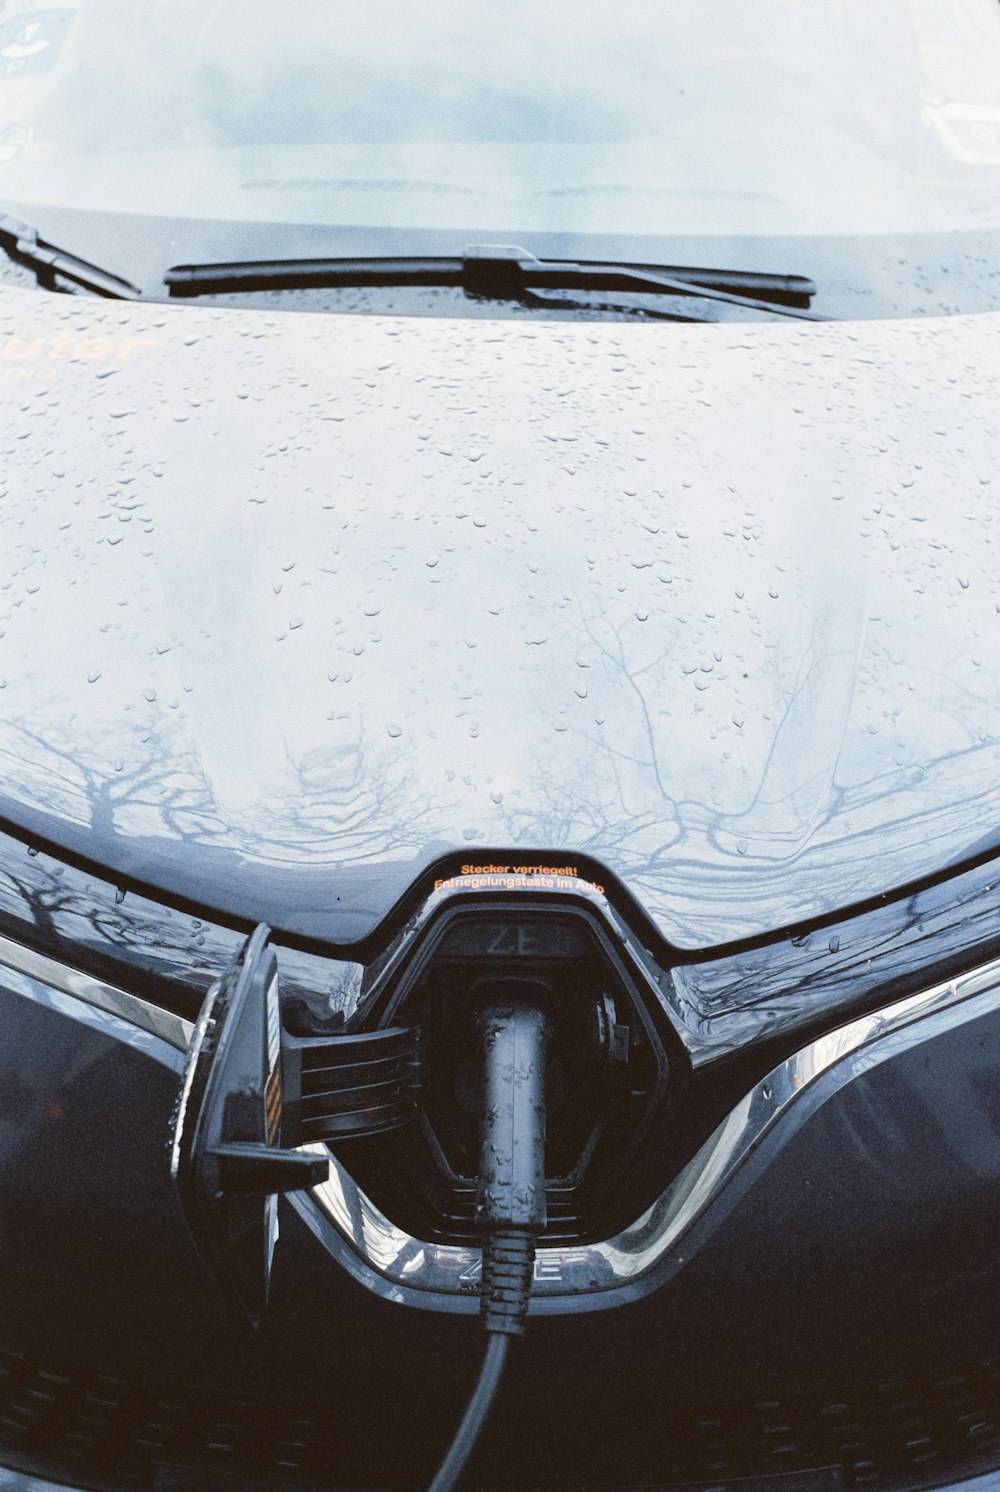 a close up of a car's hood with water droplets on it